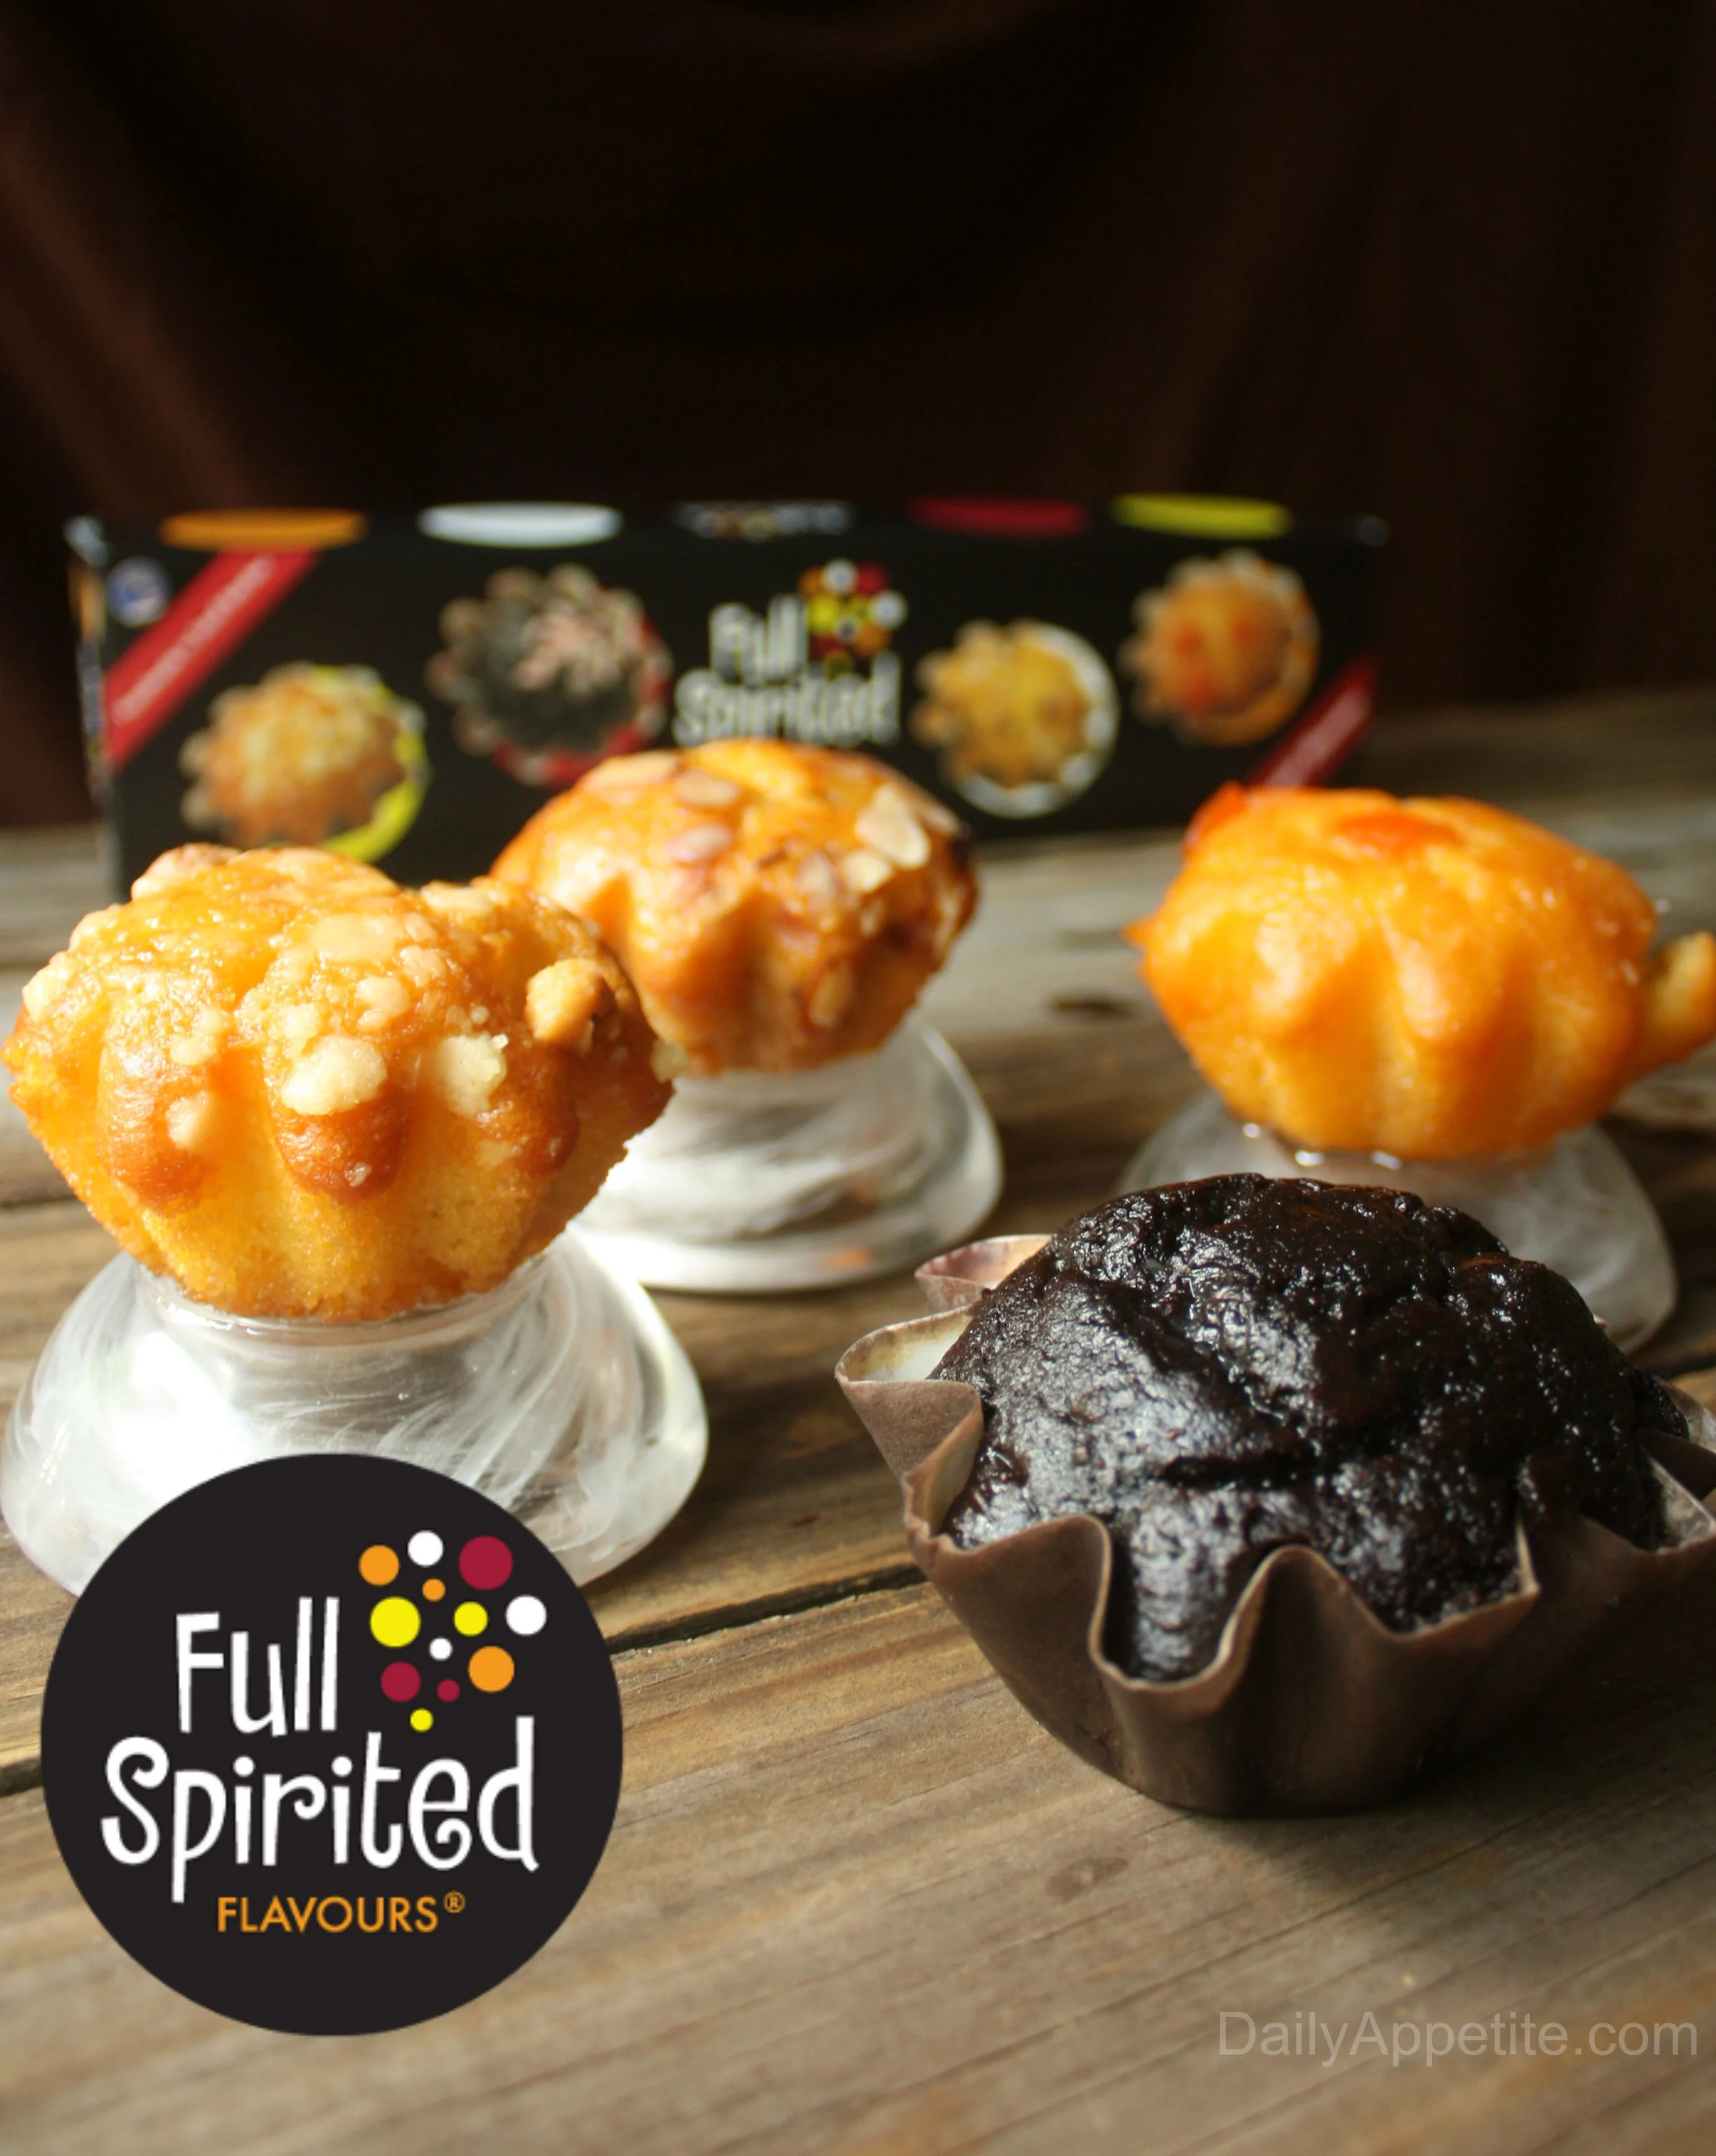 Full Spirited Liqueur Cakes. I am buying these for my foodie friends for Christmas